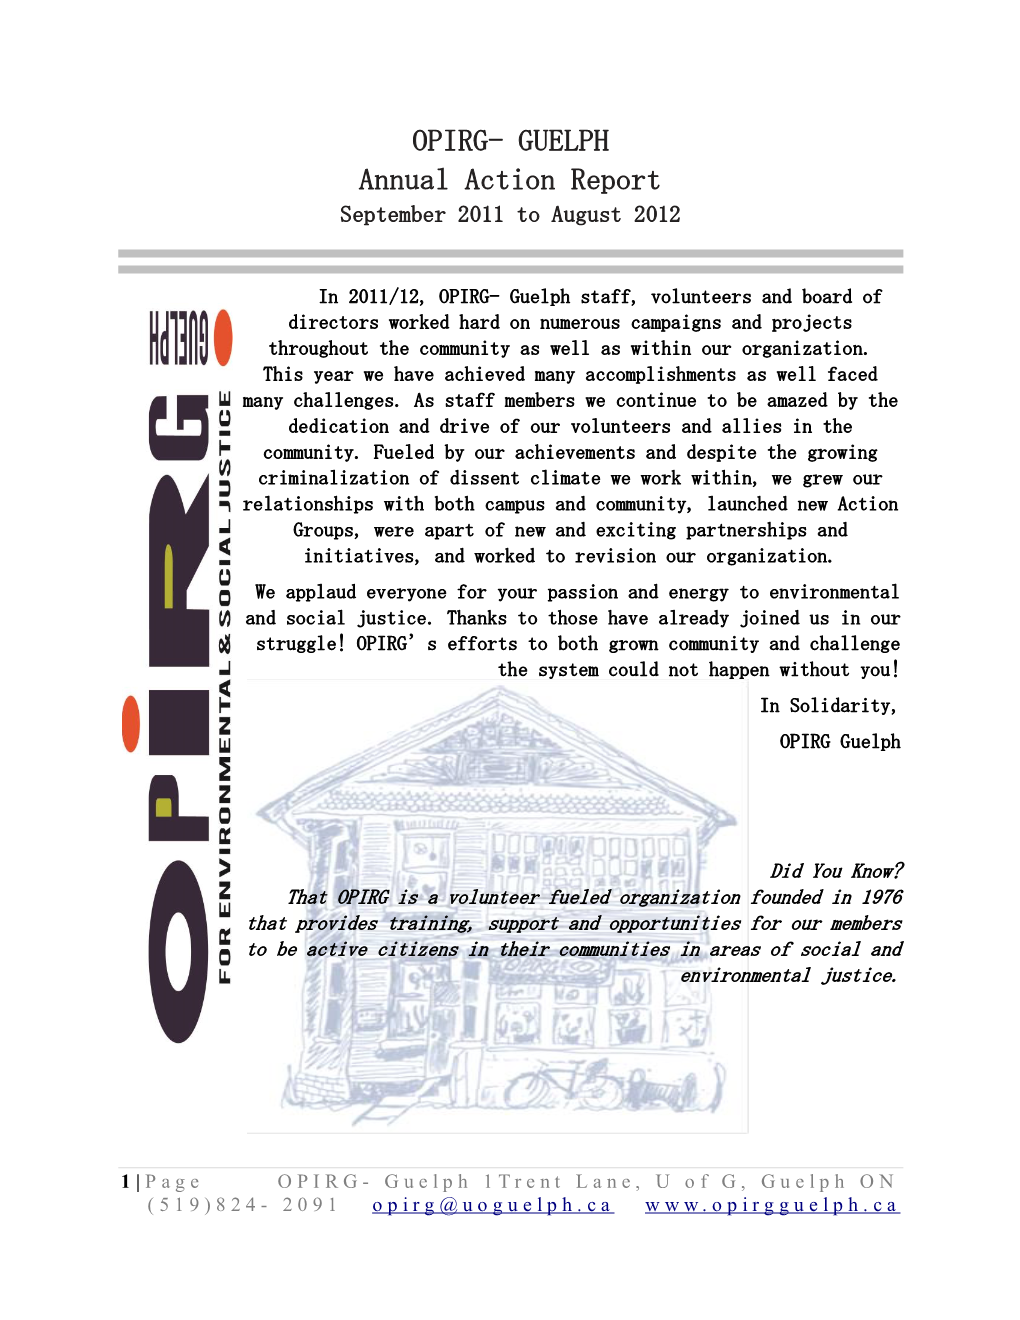 Link to 2011-12 Annual Action Report